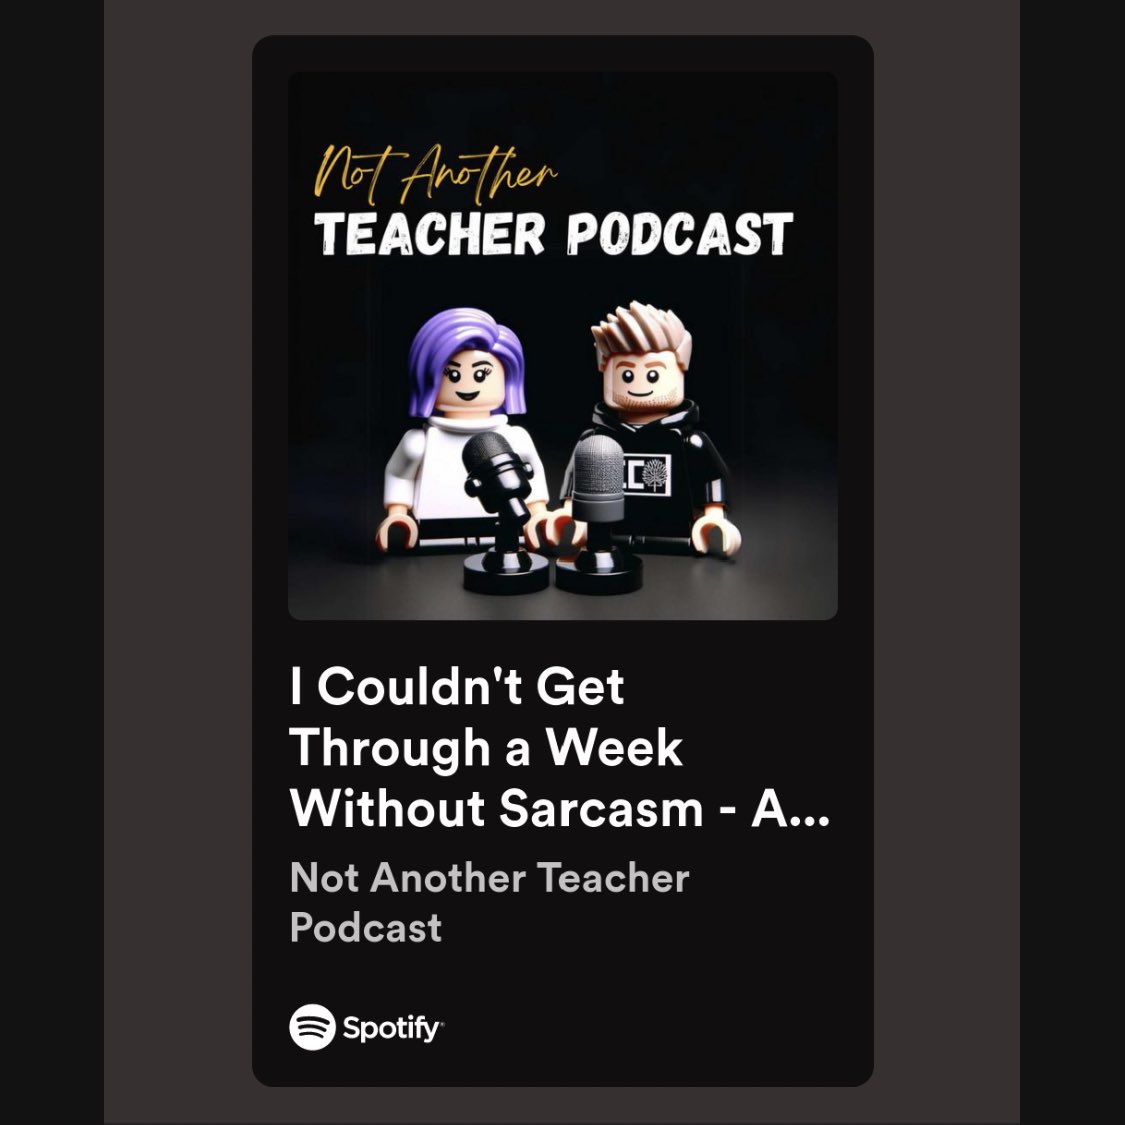 🎧 Delighted to share our first guest episode - with inspirational educator @MisterFirth! We talk about his comedy reels, what gets him through the week, & his best & worst teacher moments! 🎙️ Not Another Teacher Podcast 🎙️ Listen today on Spotify open.spotify.com/episode/2EzesI…